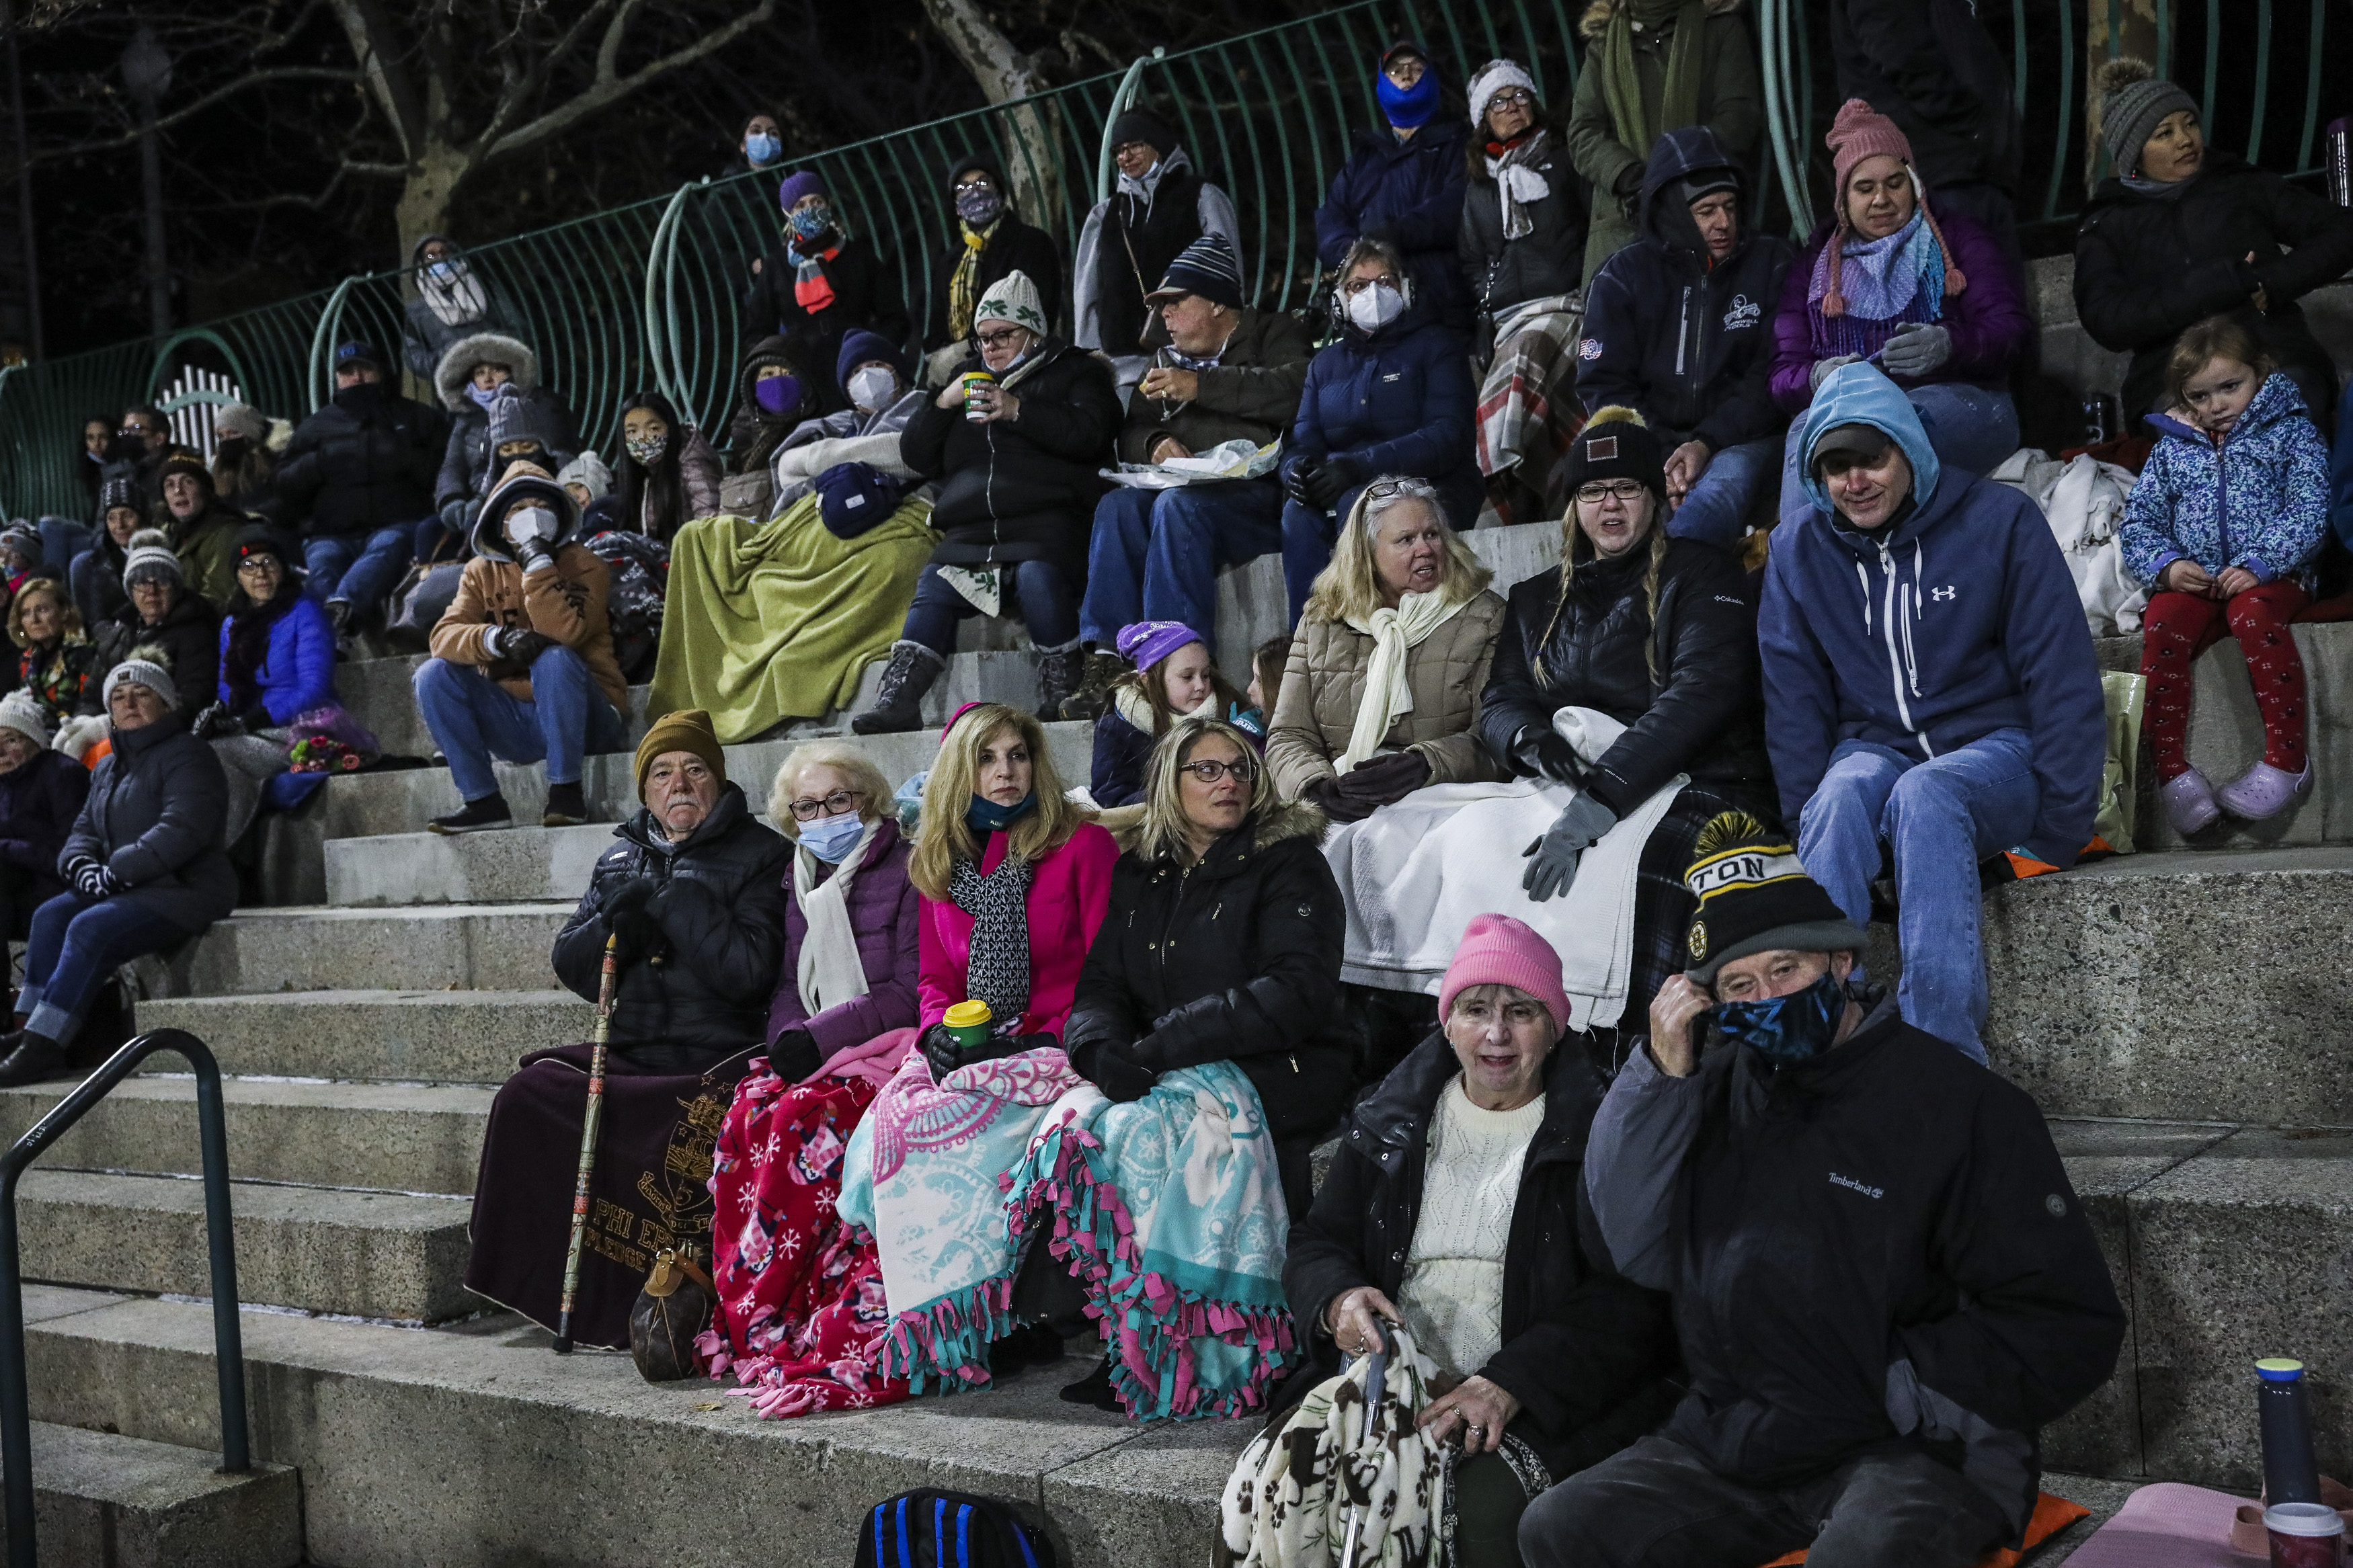 People wrap themselves in blankets as they sit around downtown BankNewport.